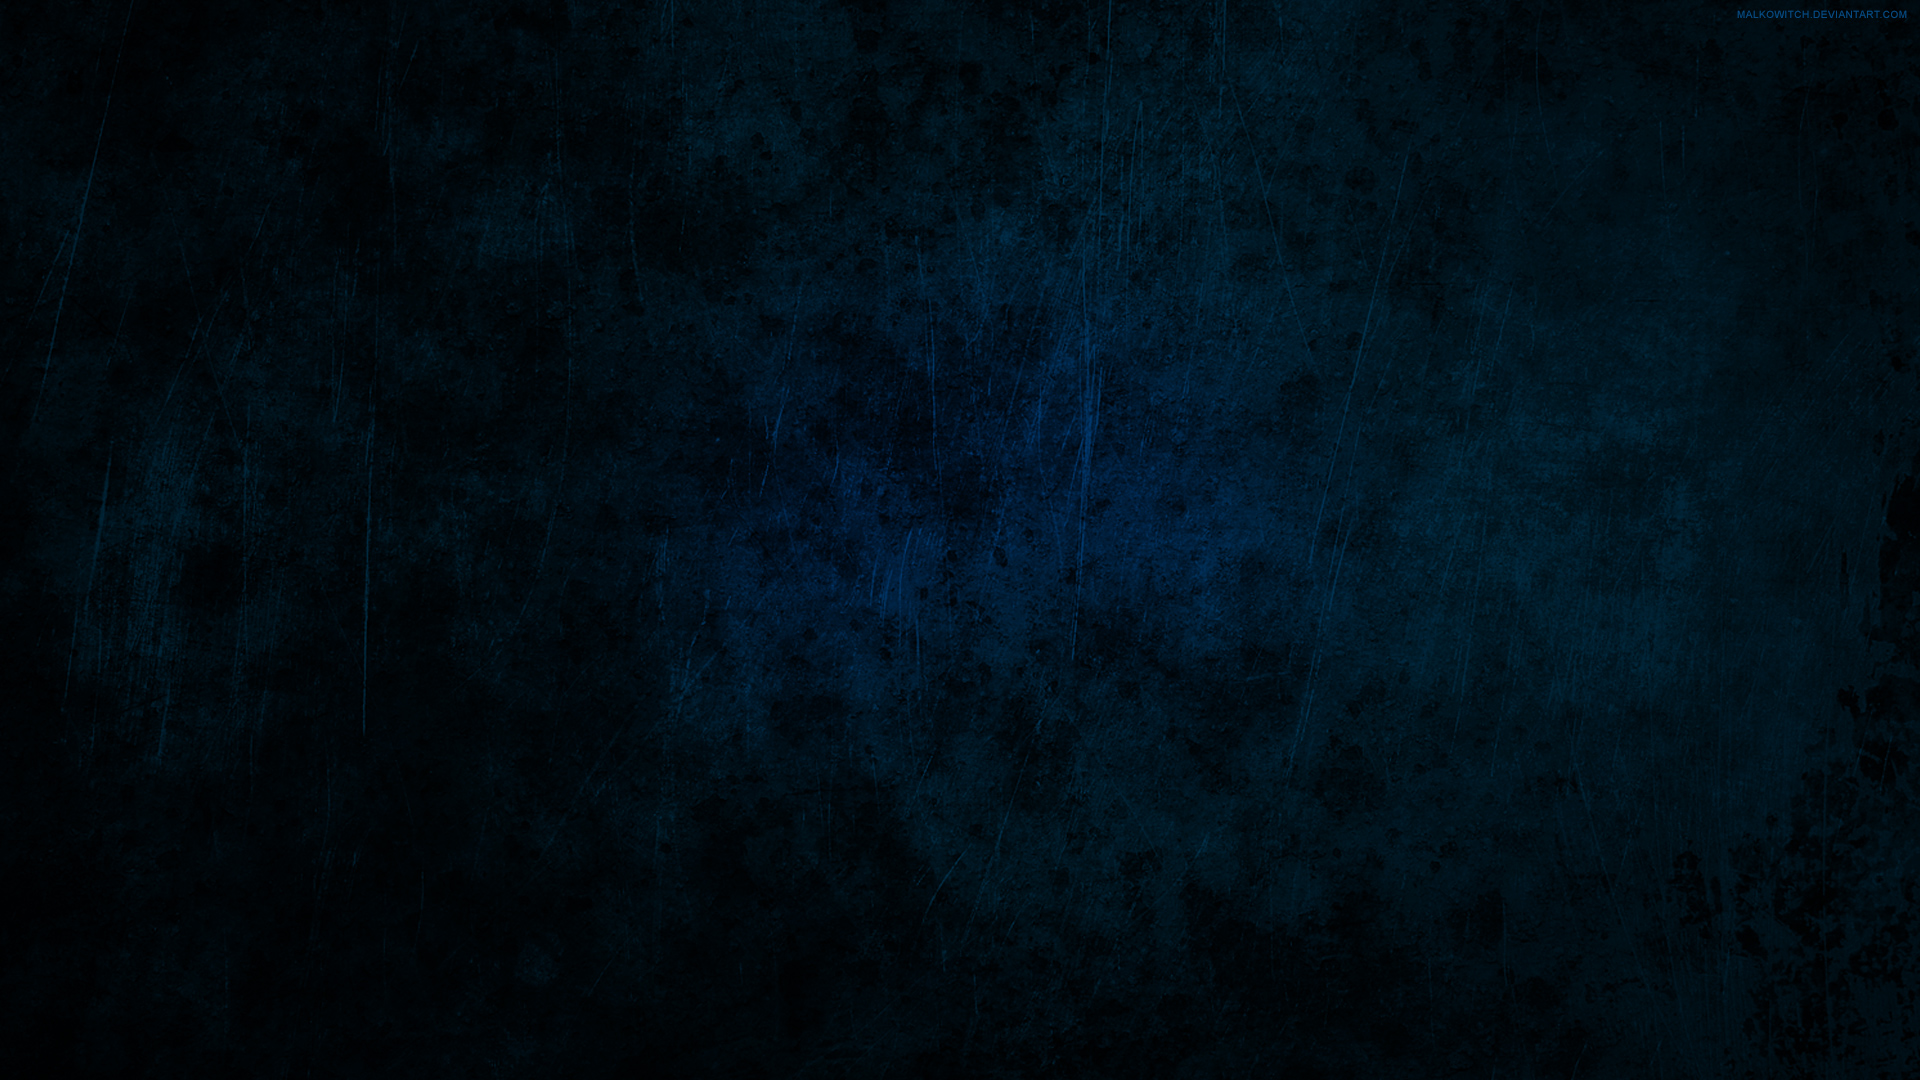 Free download Dark Blue Wallpaper by malkowitch [1920x1080] for your Desktop, Mobile & Tablet. Explore Dark Blue Wallpaper. Dark Blue Abstract Wallpaper, Dark Blue Phone Wallpaper, Dark Blue Wallpaper Border